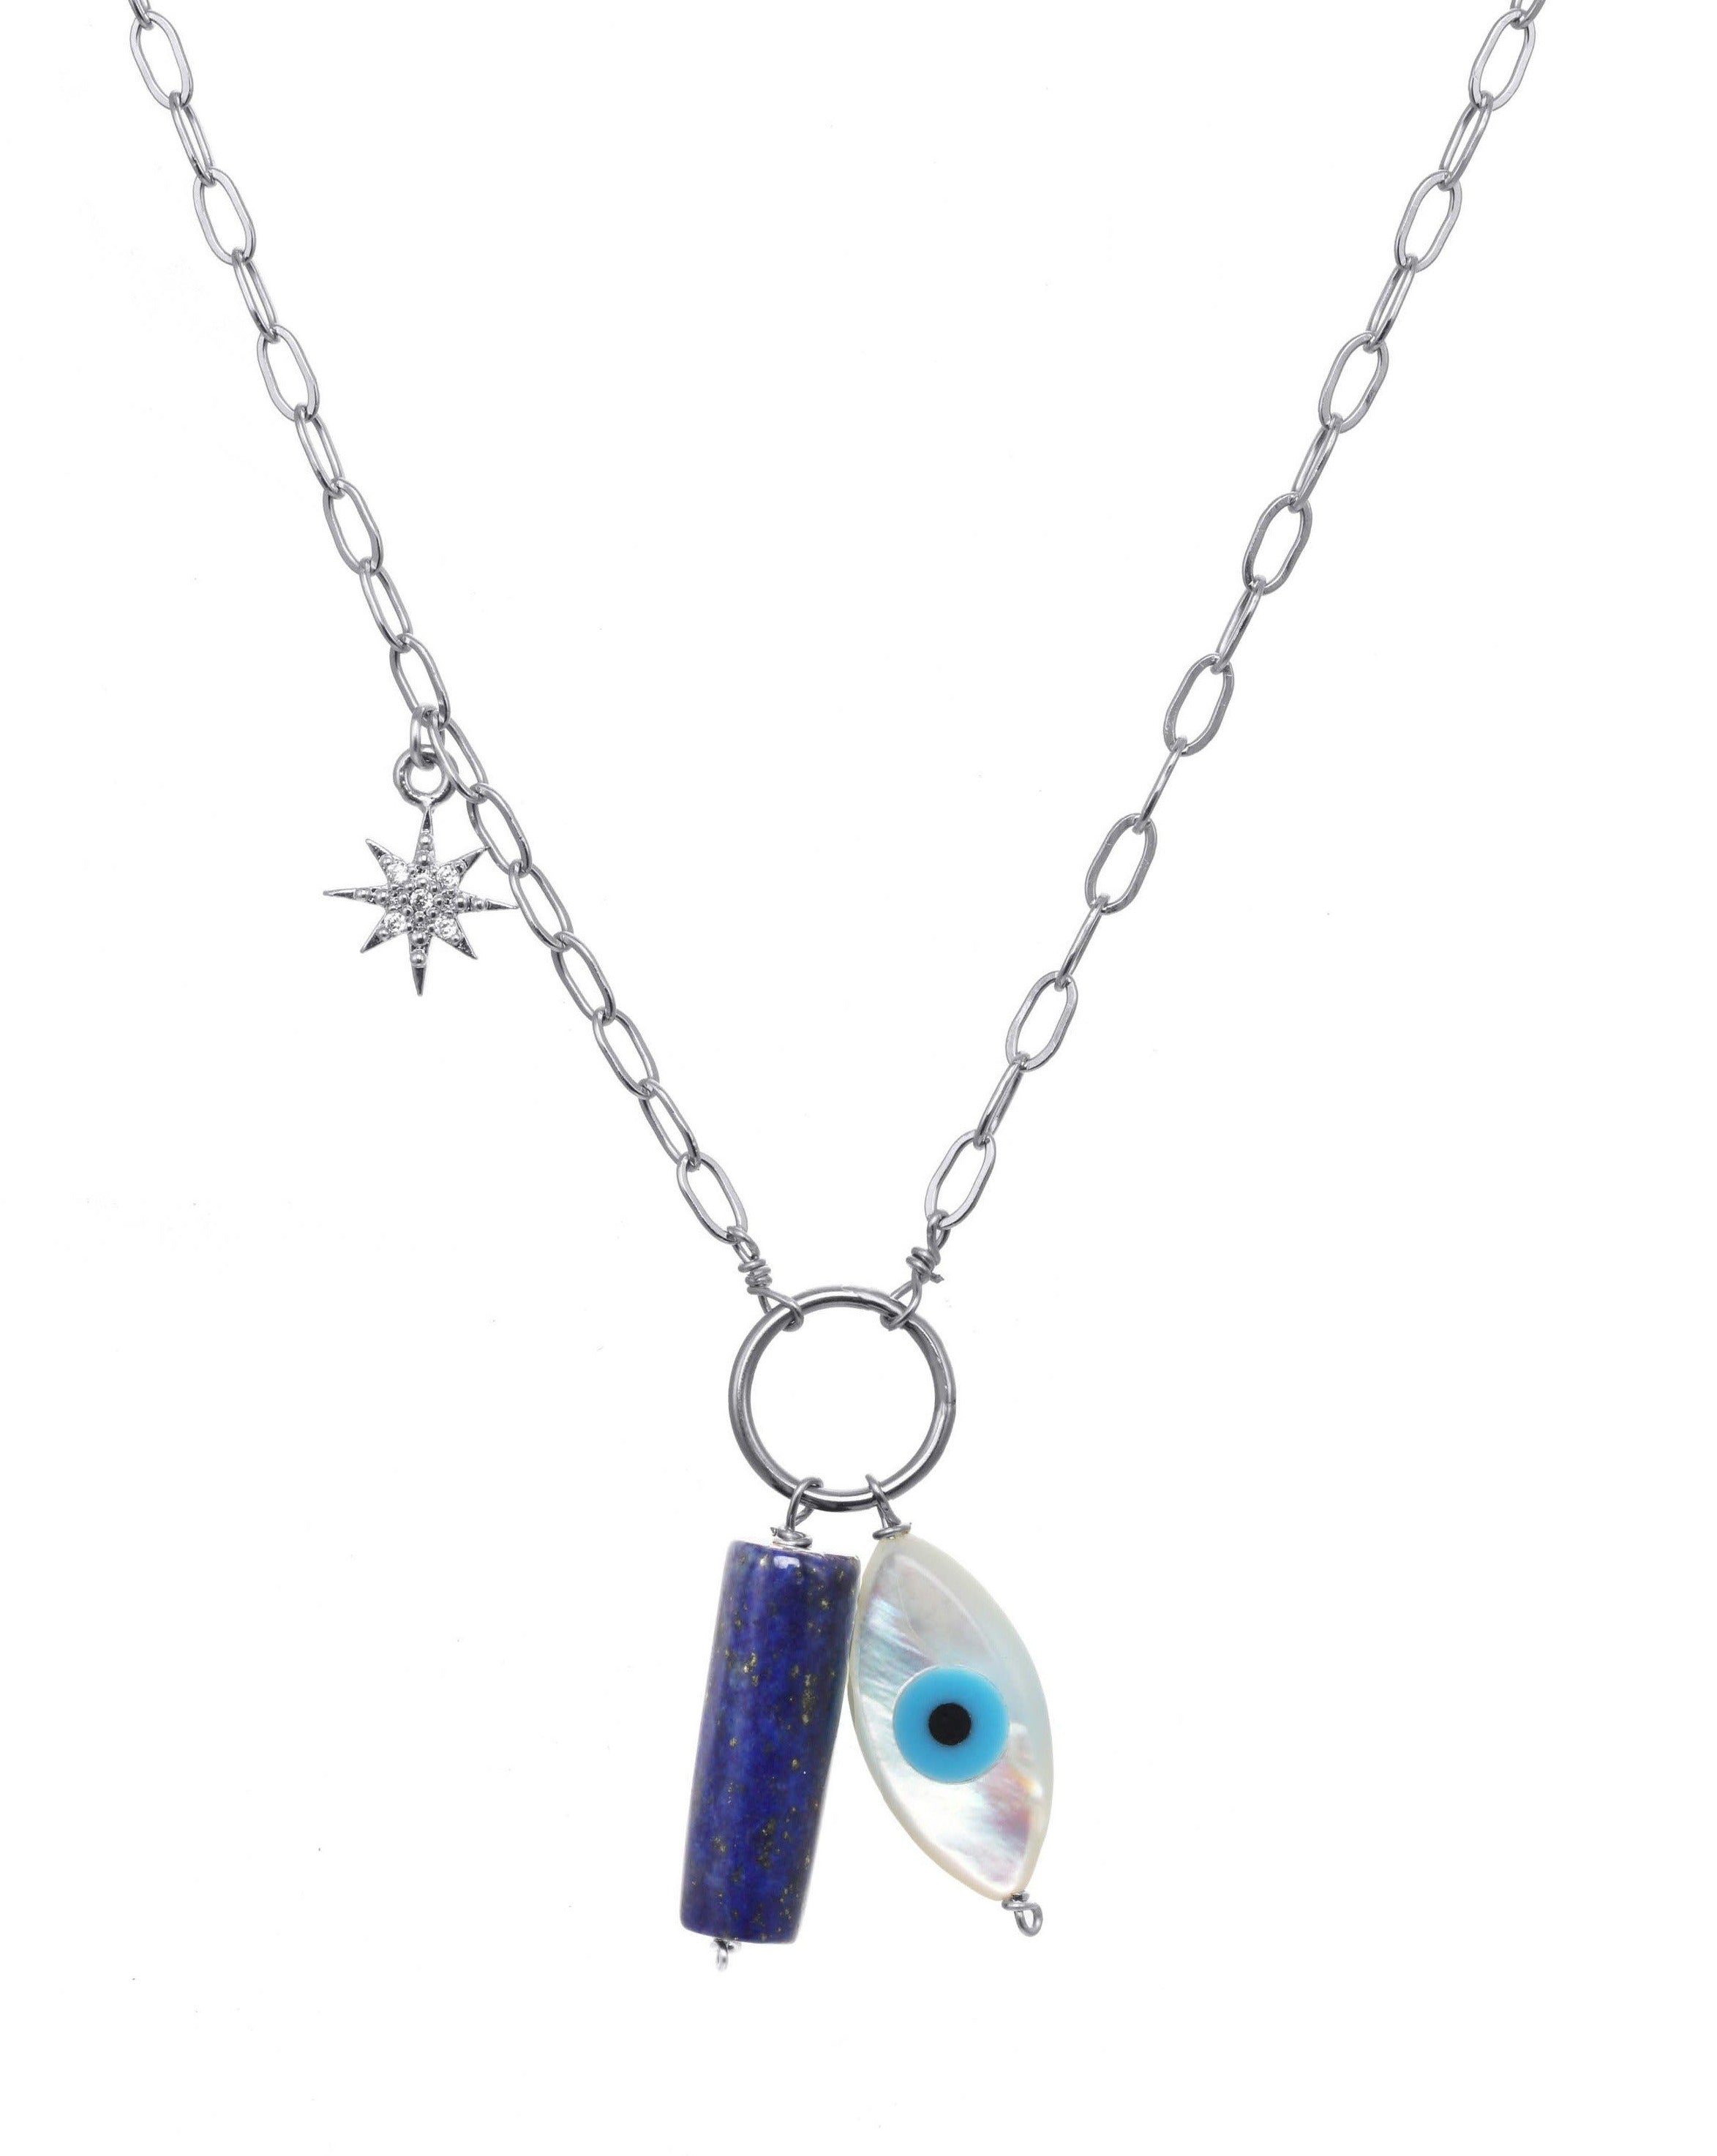 Eye Chakra Necklace by KOZAKH. A Sterling Silver necklace with adjustable length from 20 inches, featuring a hand carved Mother of Pearl Evil Eye, a cylindrical cut Lapis, and a Cubic Zirconia encrusted star charm.